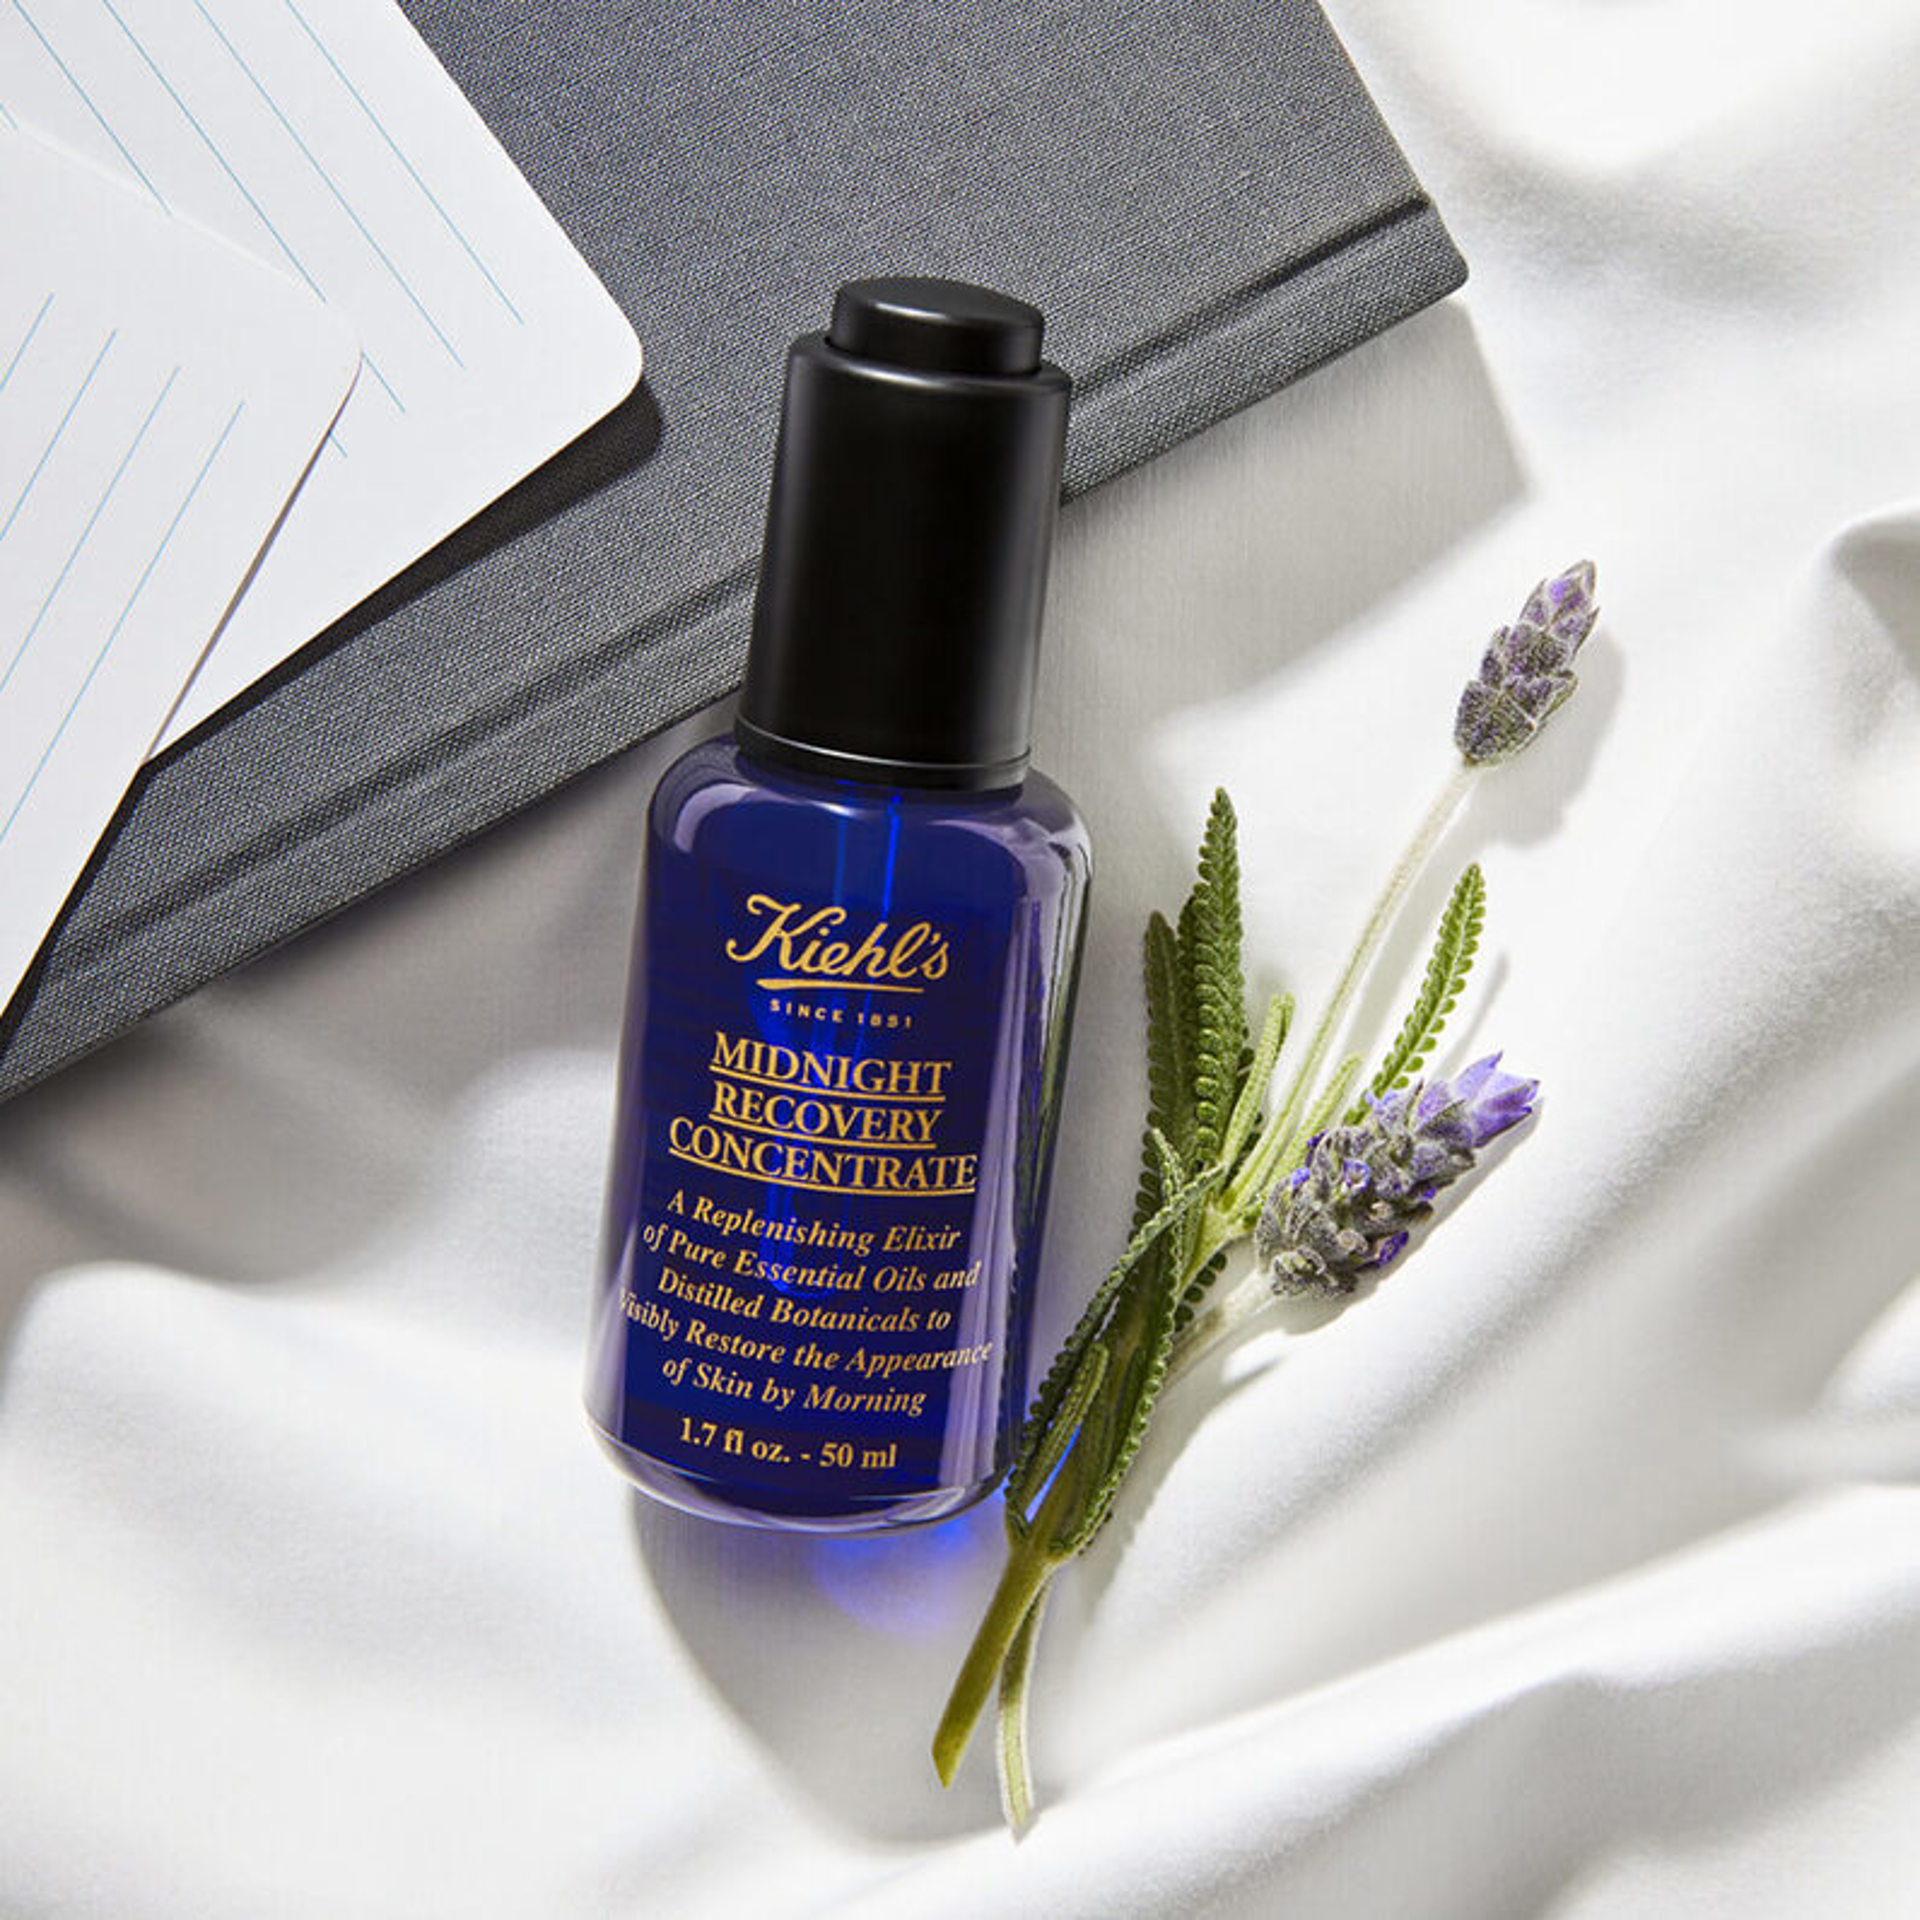  Kiehl’s Midnight Recovery Concentrate Serum